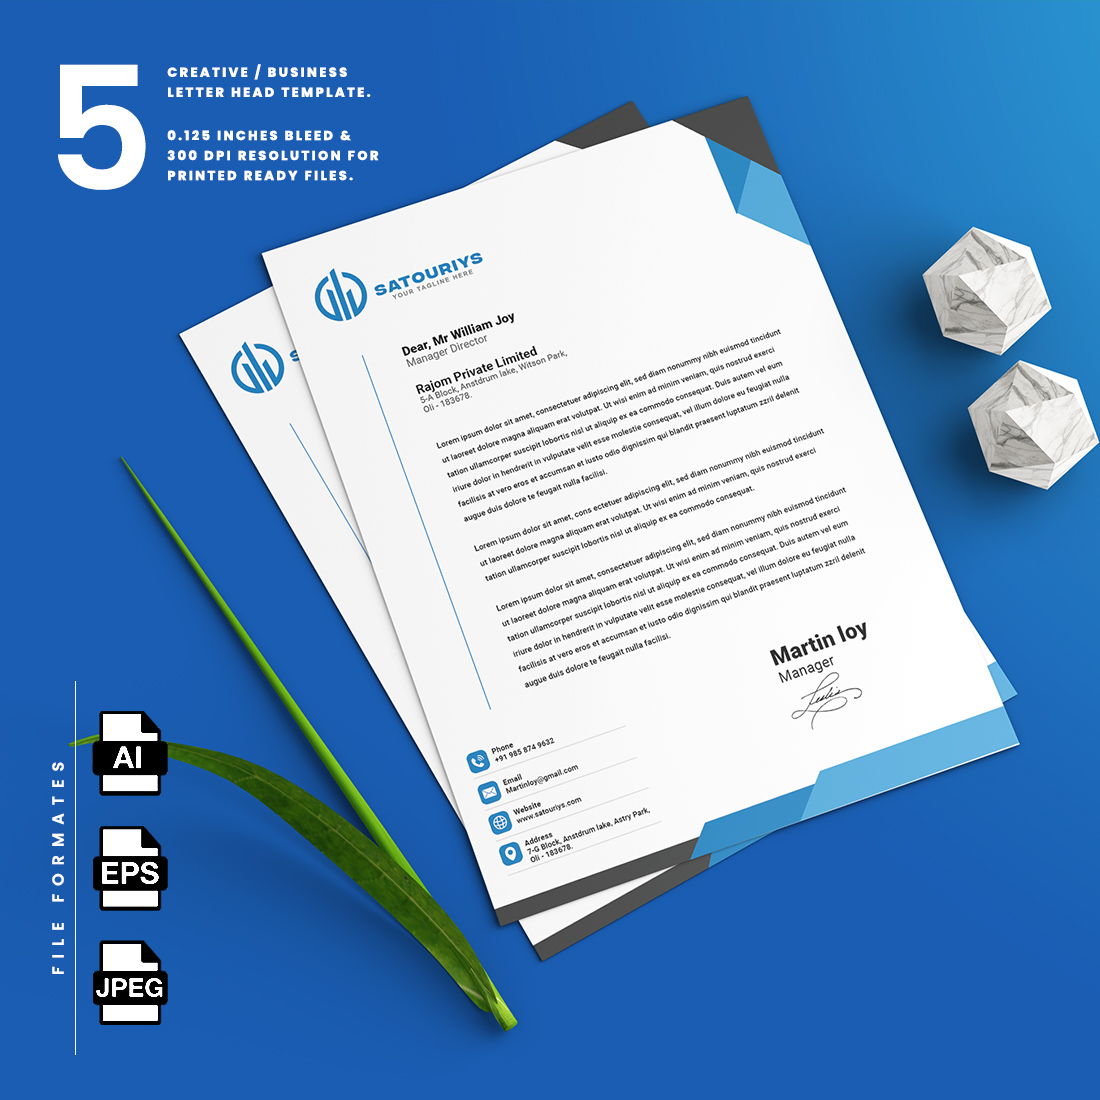 05 Creative/Modern Business Letter Head Templates Bundle – Just $20 preview image.